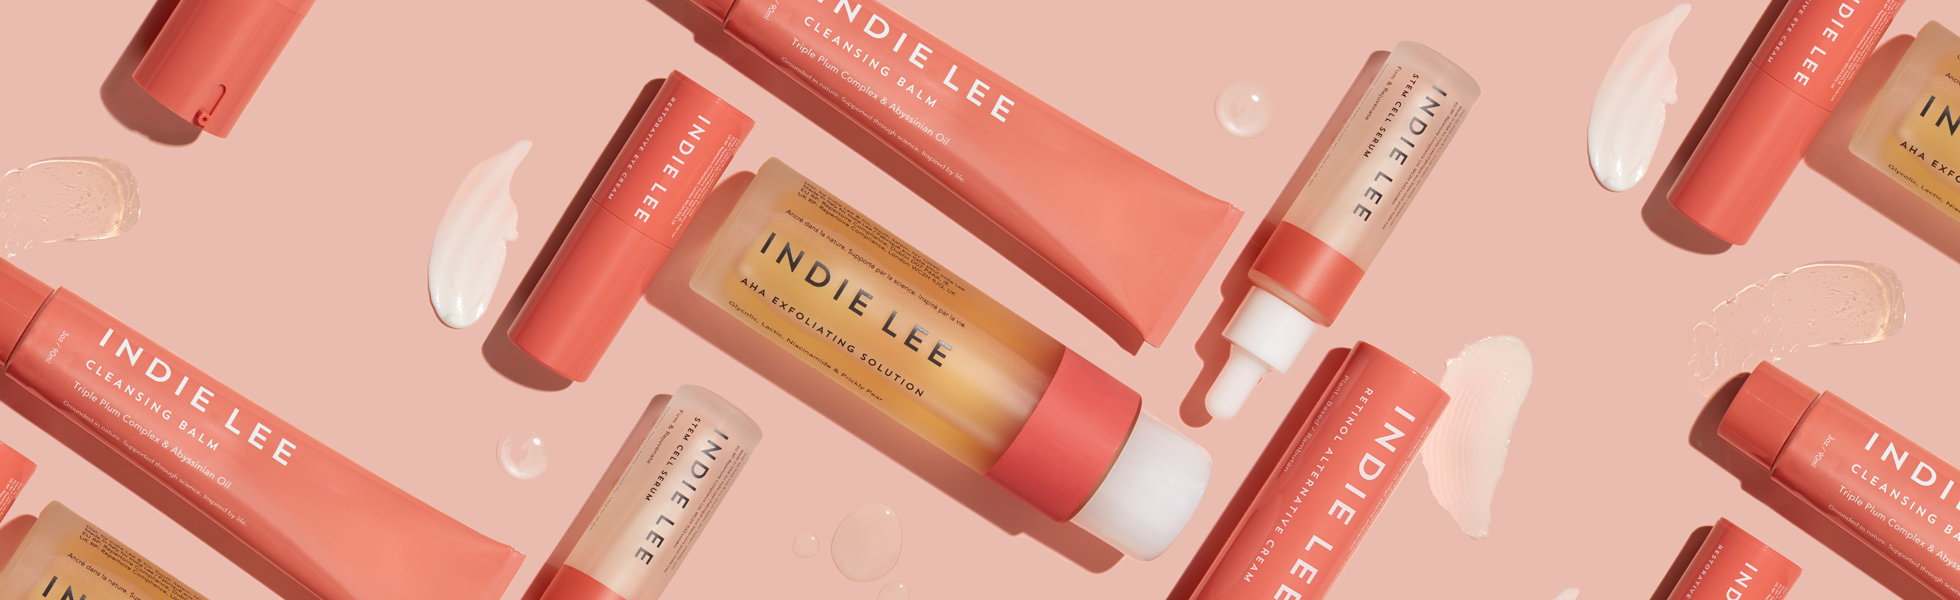 Indie Lee Radiance Collection